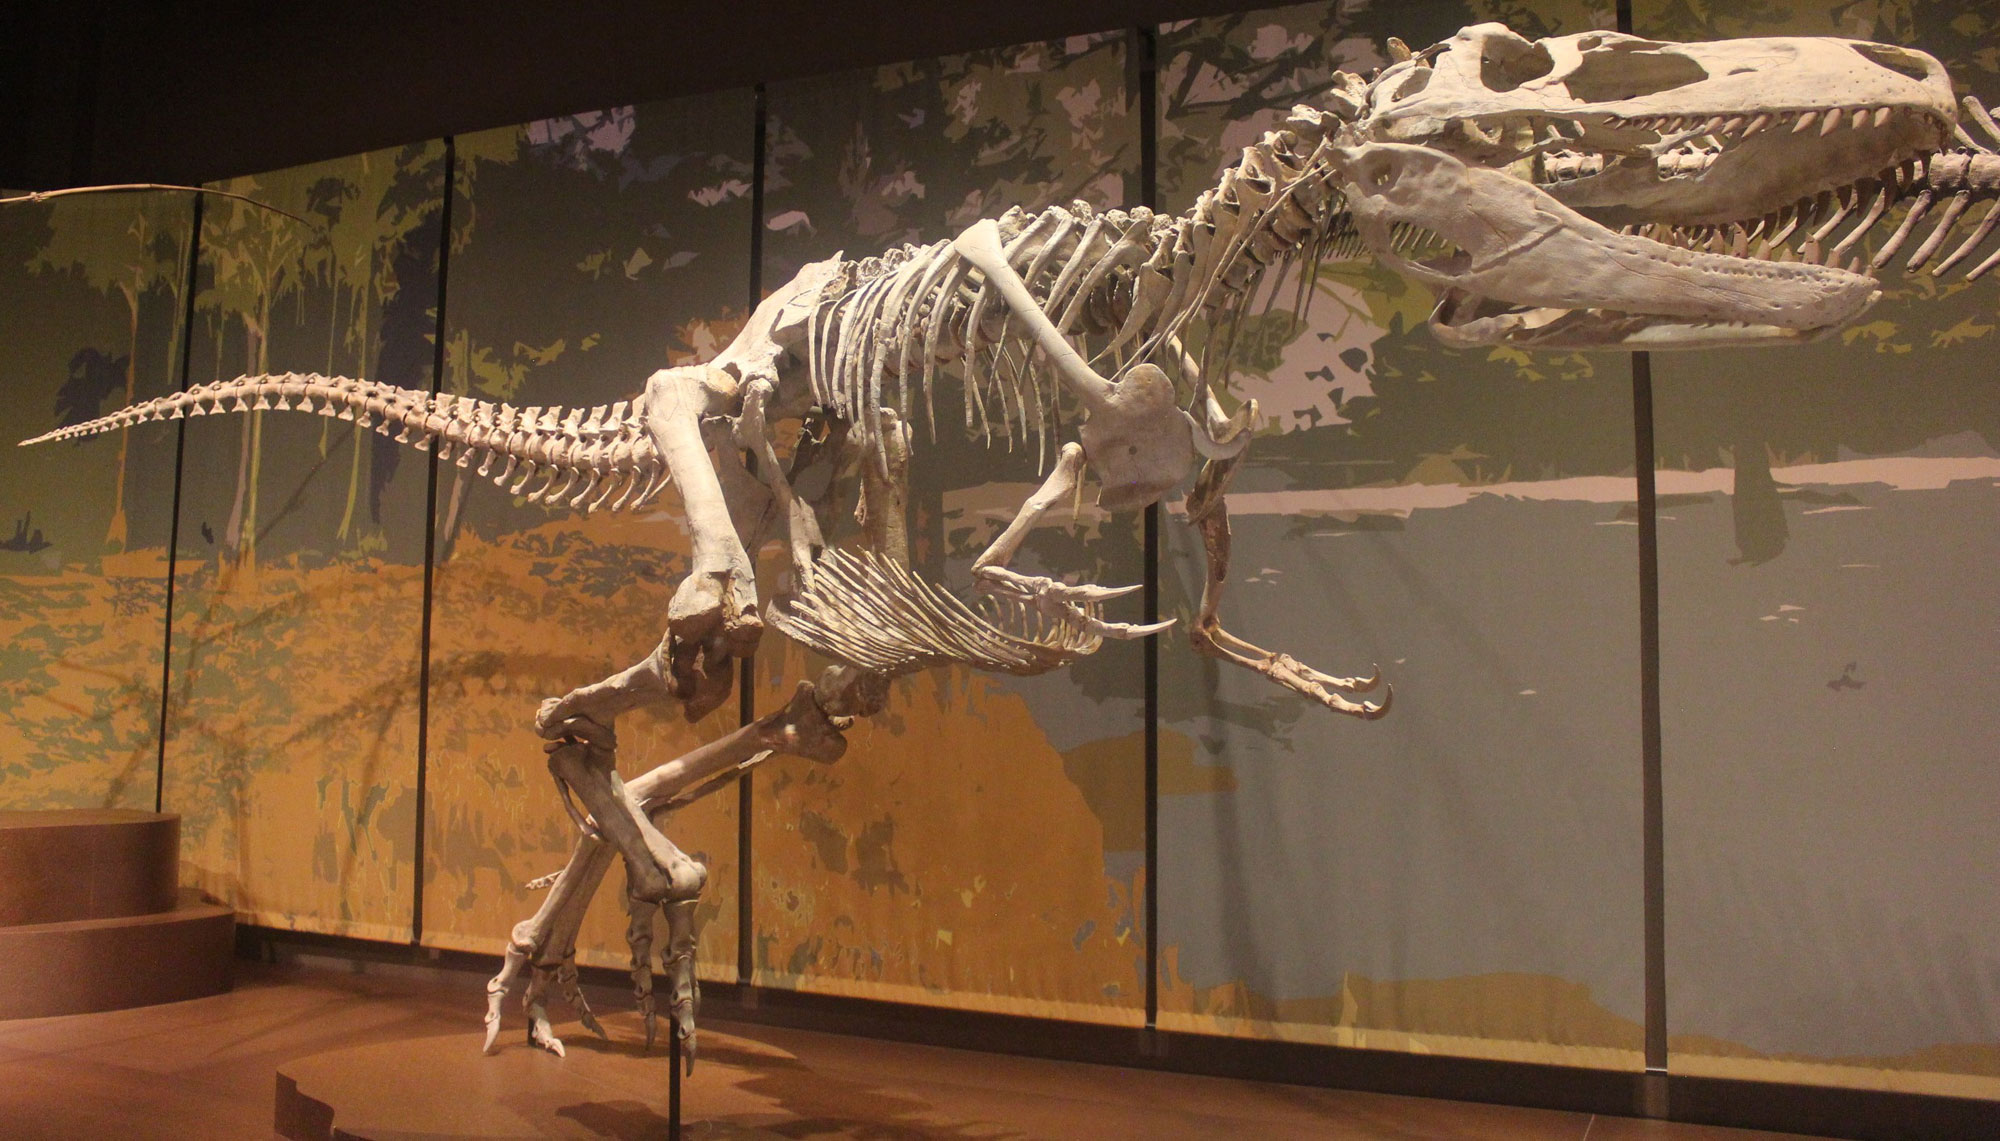 Photograph of a reconstructed Appalachiosaurus skeleton on display in a museum.